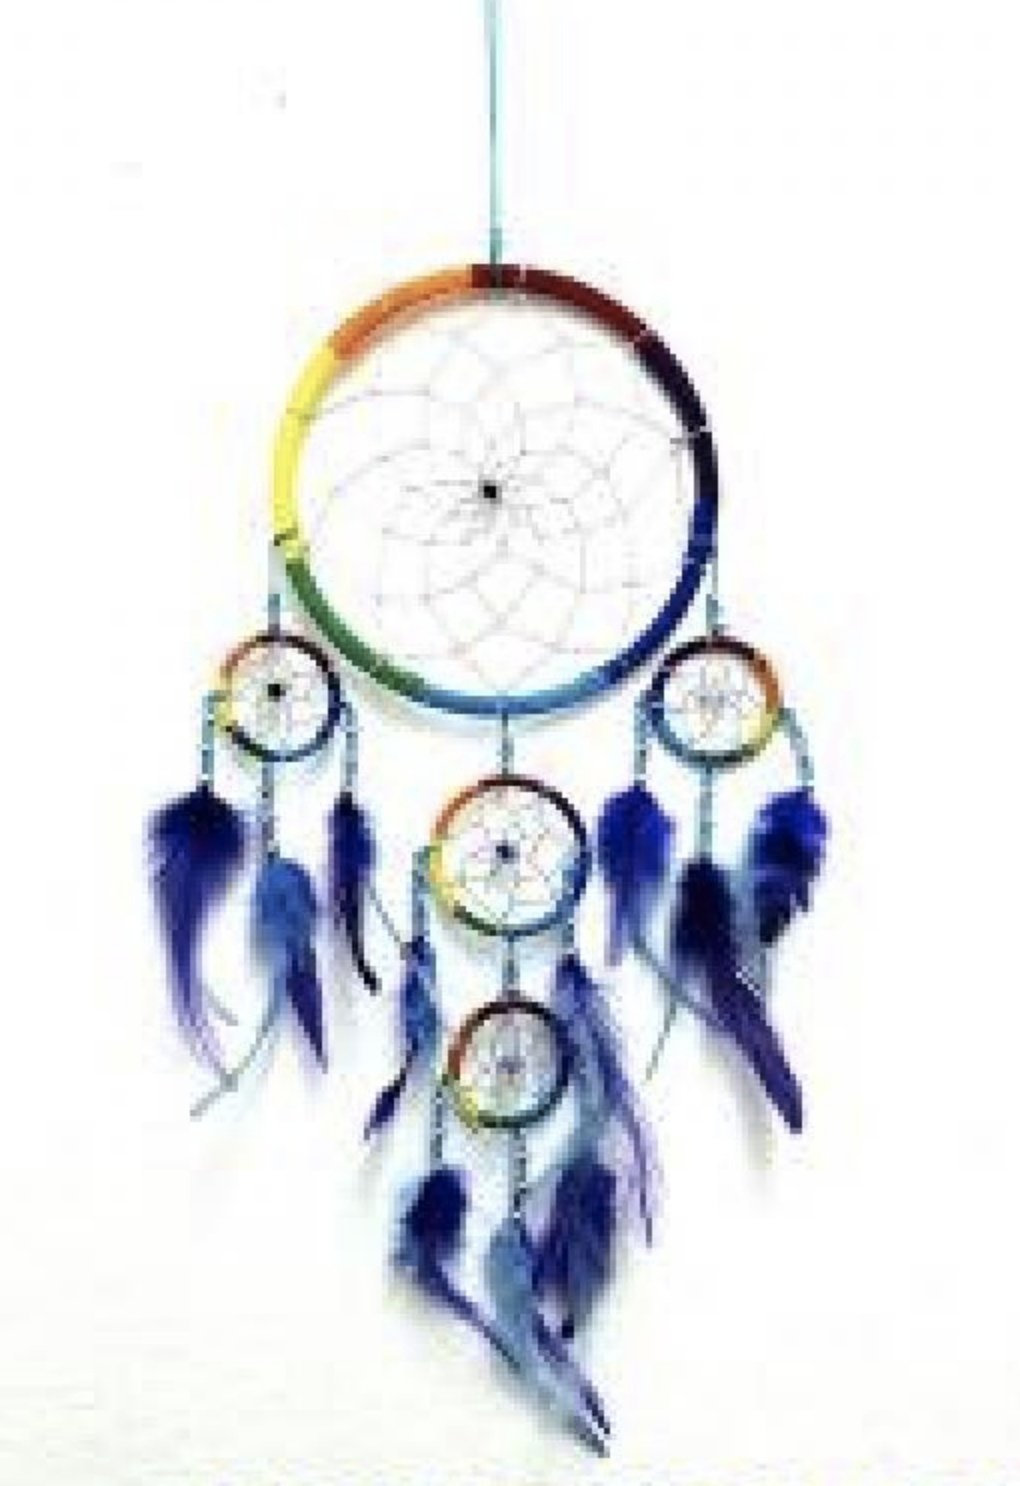 6" Multi-Colored Dreamcatcher With Feathers & Beads - Sacred Crystals Dreamcatchers